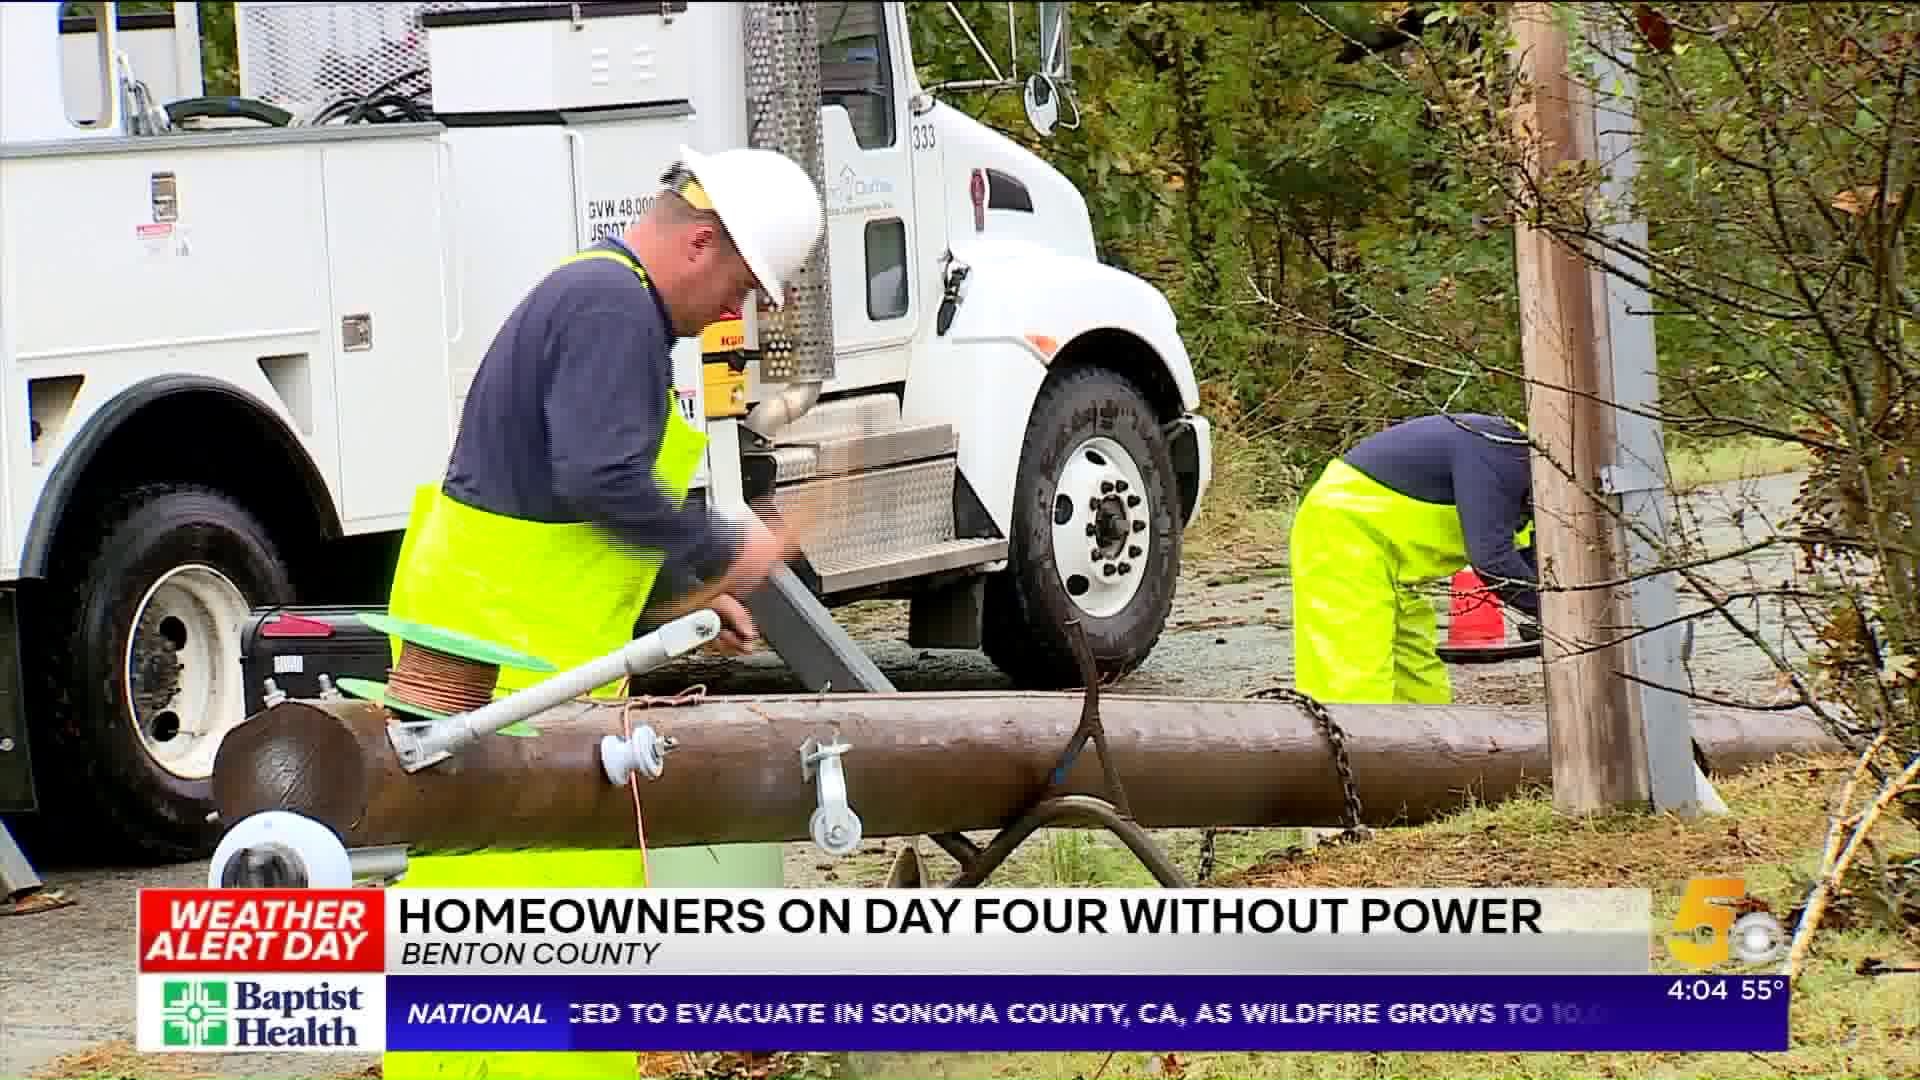 Homeowners on Day 4 Without Power